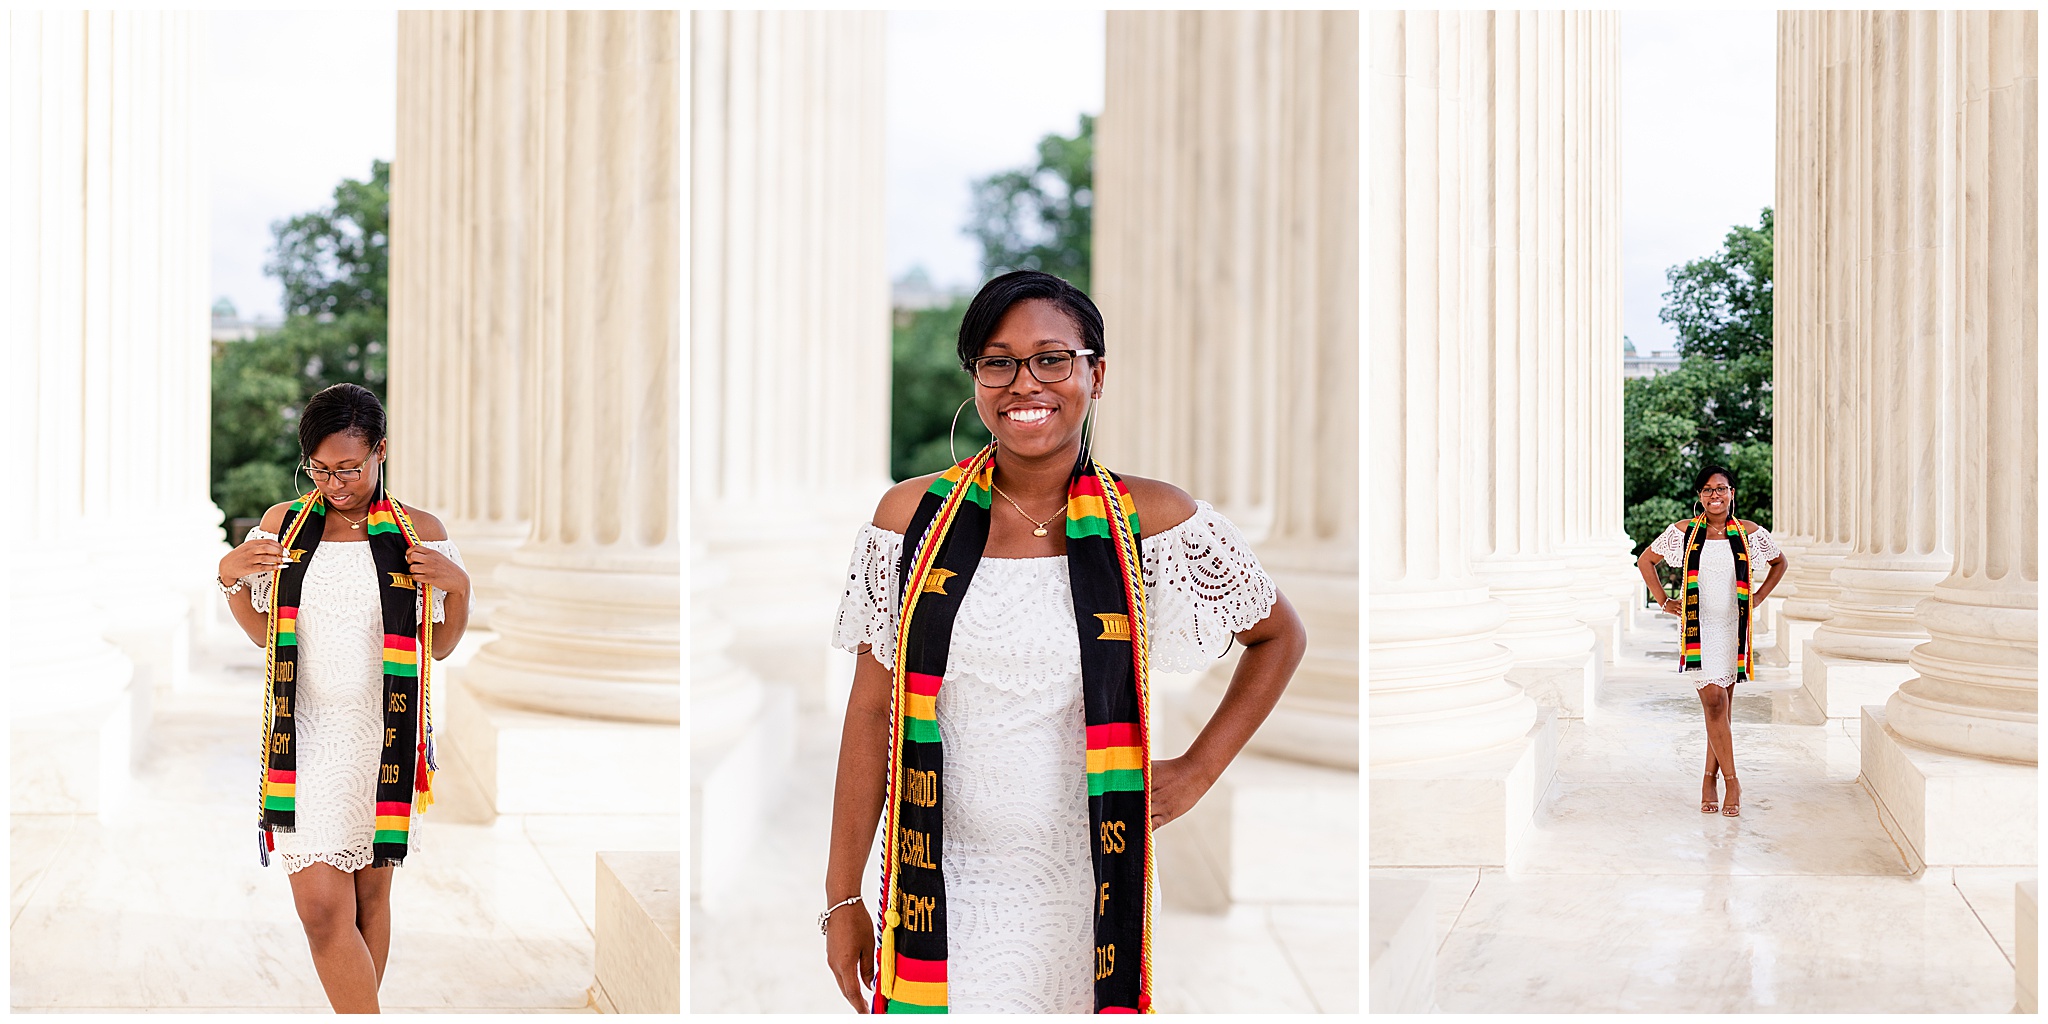 Senior Photos at the Supreme Court in Washington, DC, by Kofmehl Photography